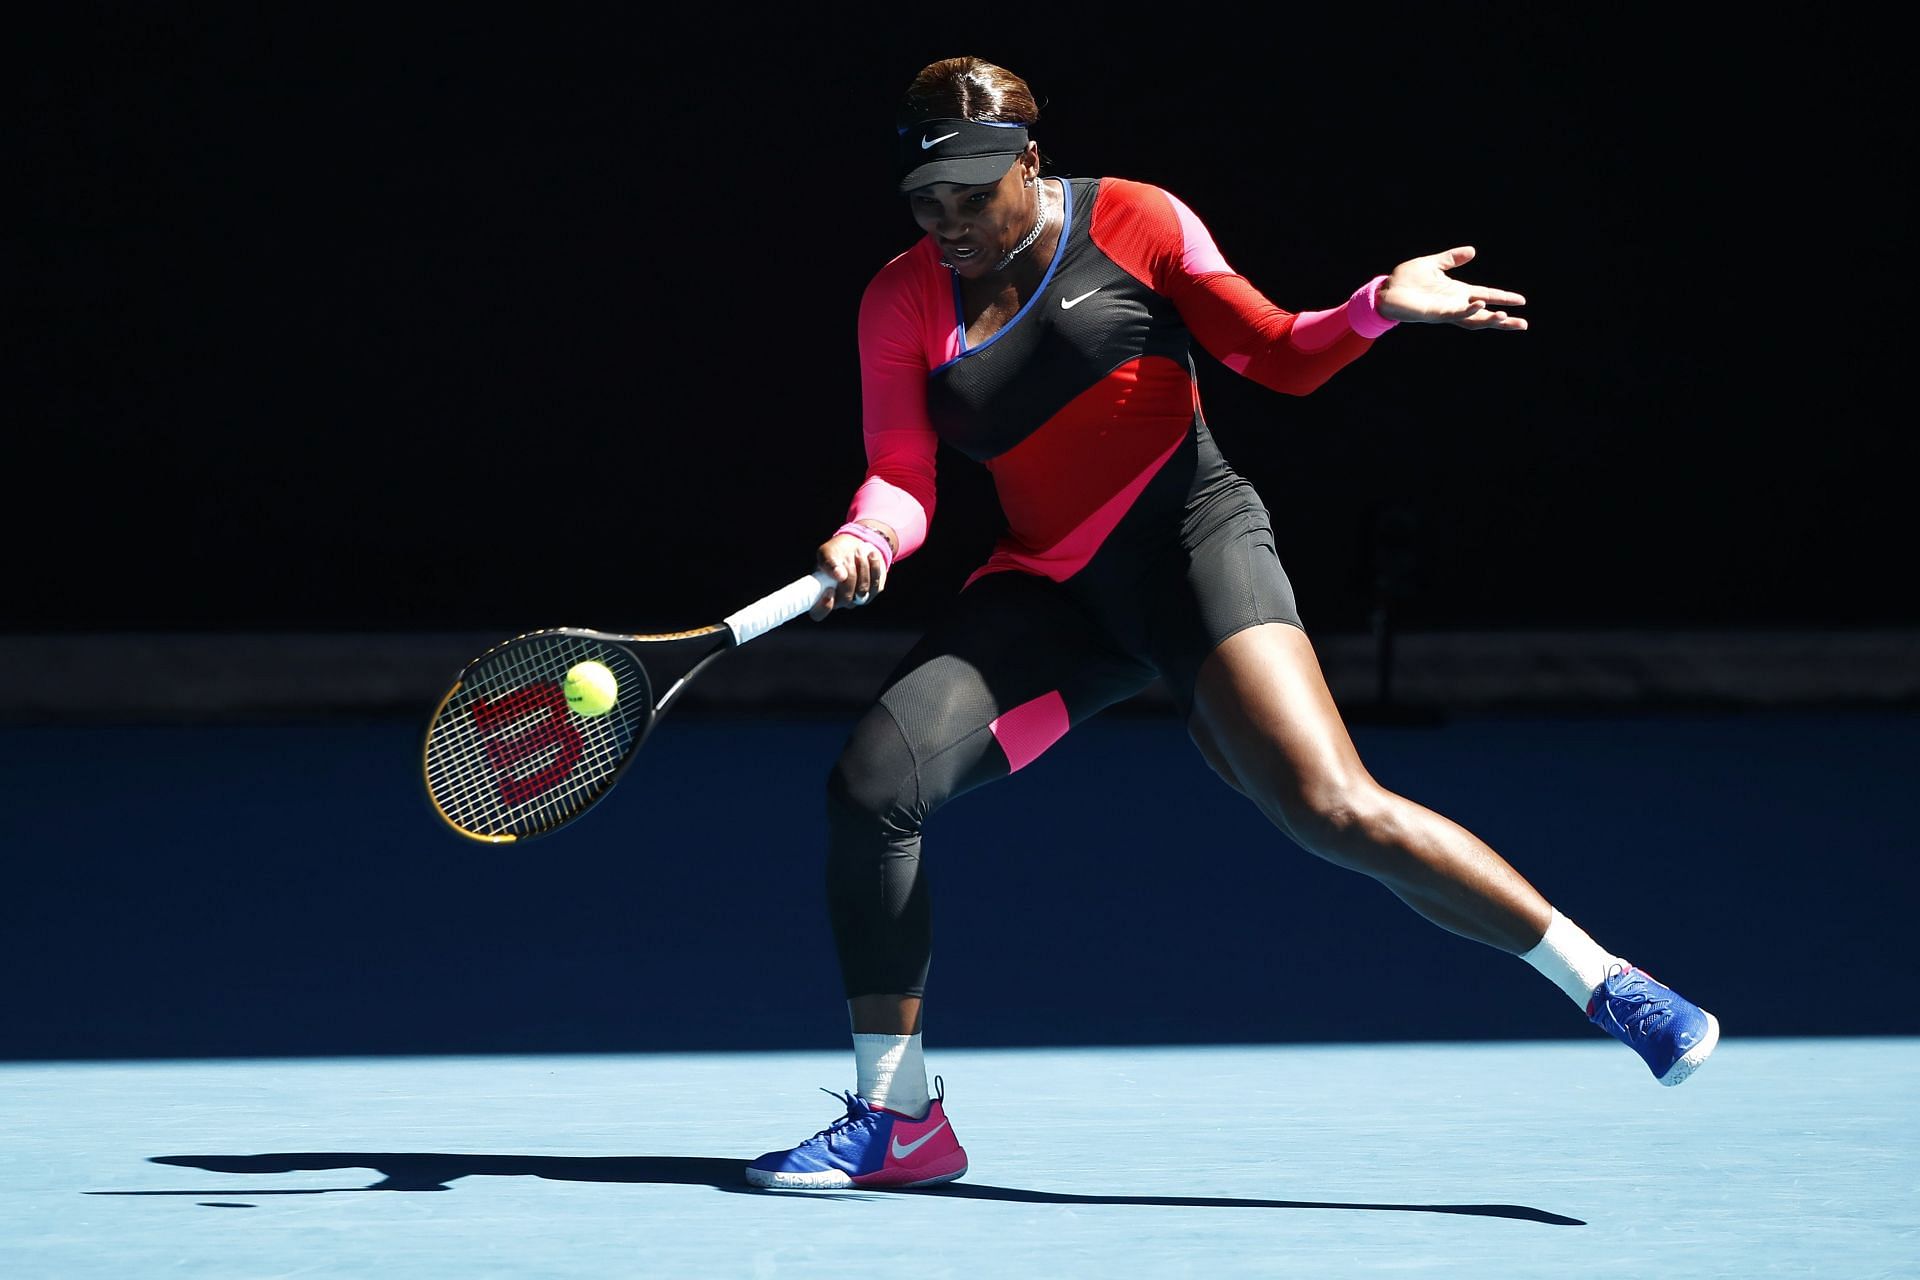 Serena Williams wore a catsuit at the 2021 Australian Open inspired by Flo-Jo.